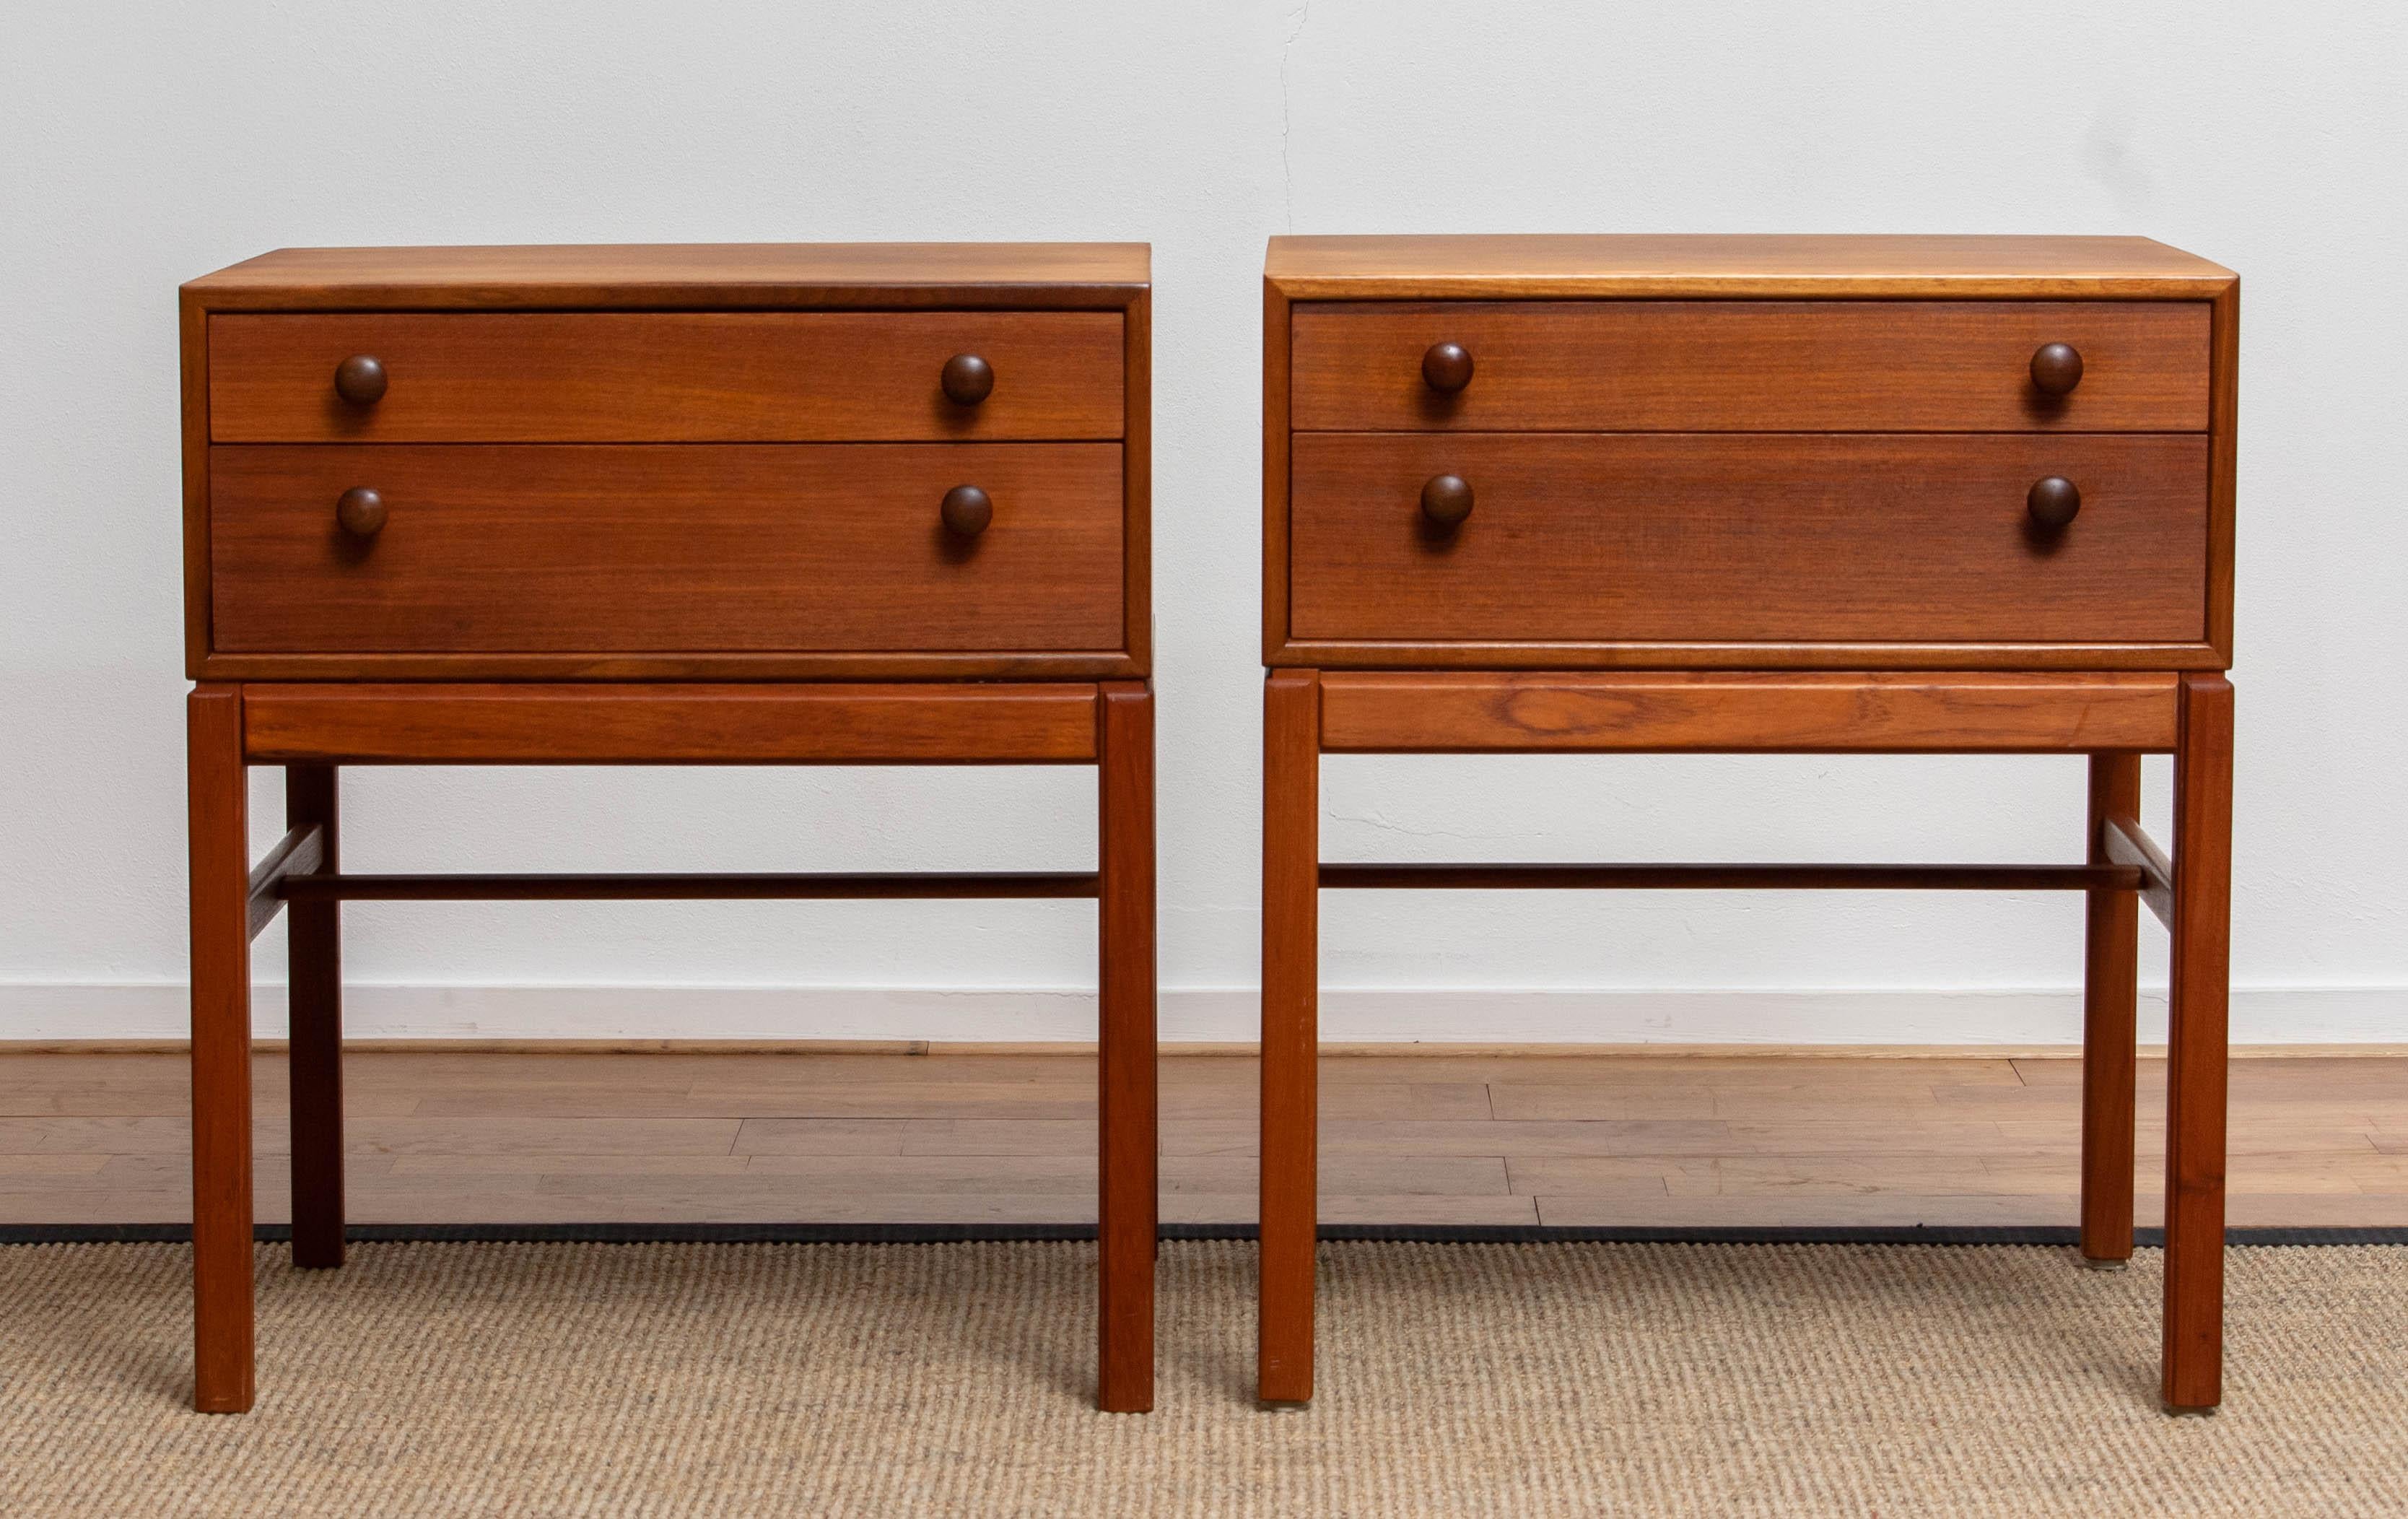 Beautiful set of two teak nightstands, side tables designed by Sven Engström & Gunnar Myrstrand for Tingström Möbelfabriks, Sweden. They are from the flexible 'Casino' collection. You can lift the top with the two drawers from the Stand. They are in